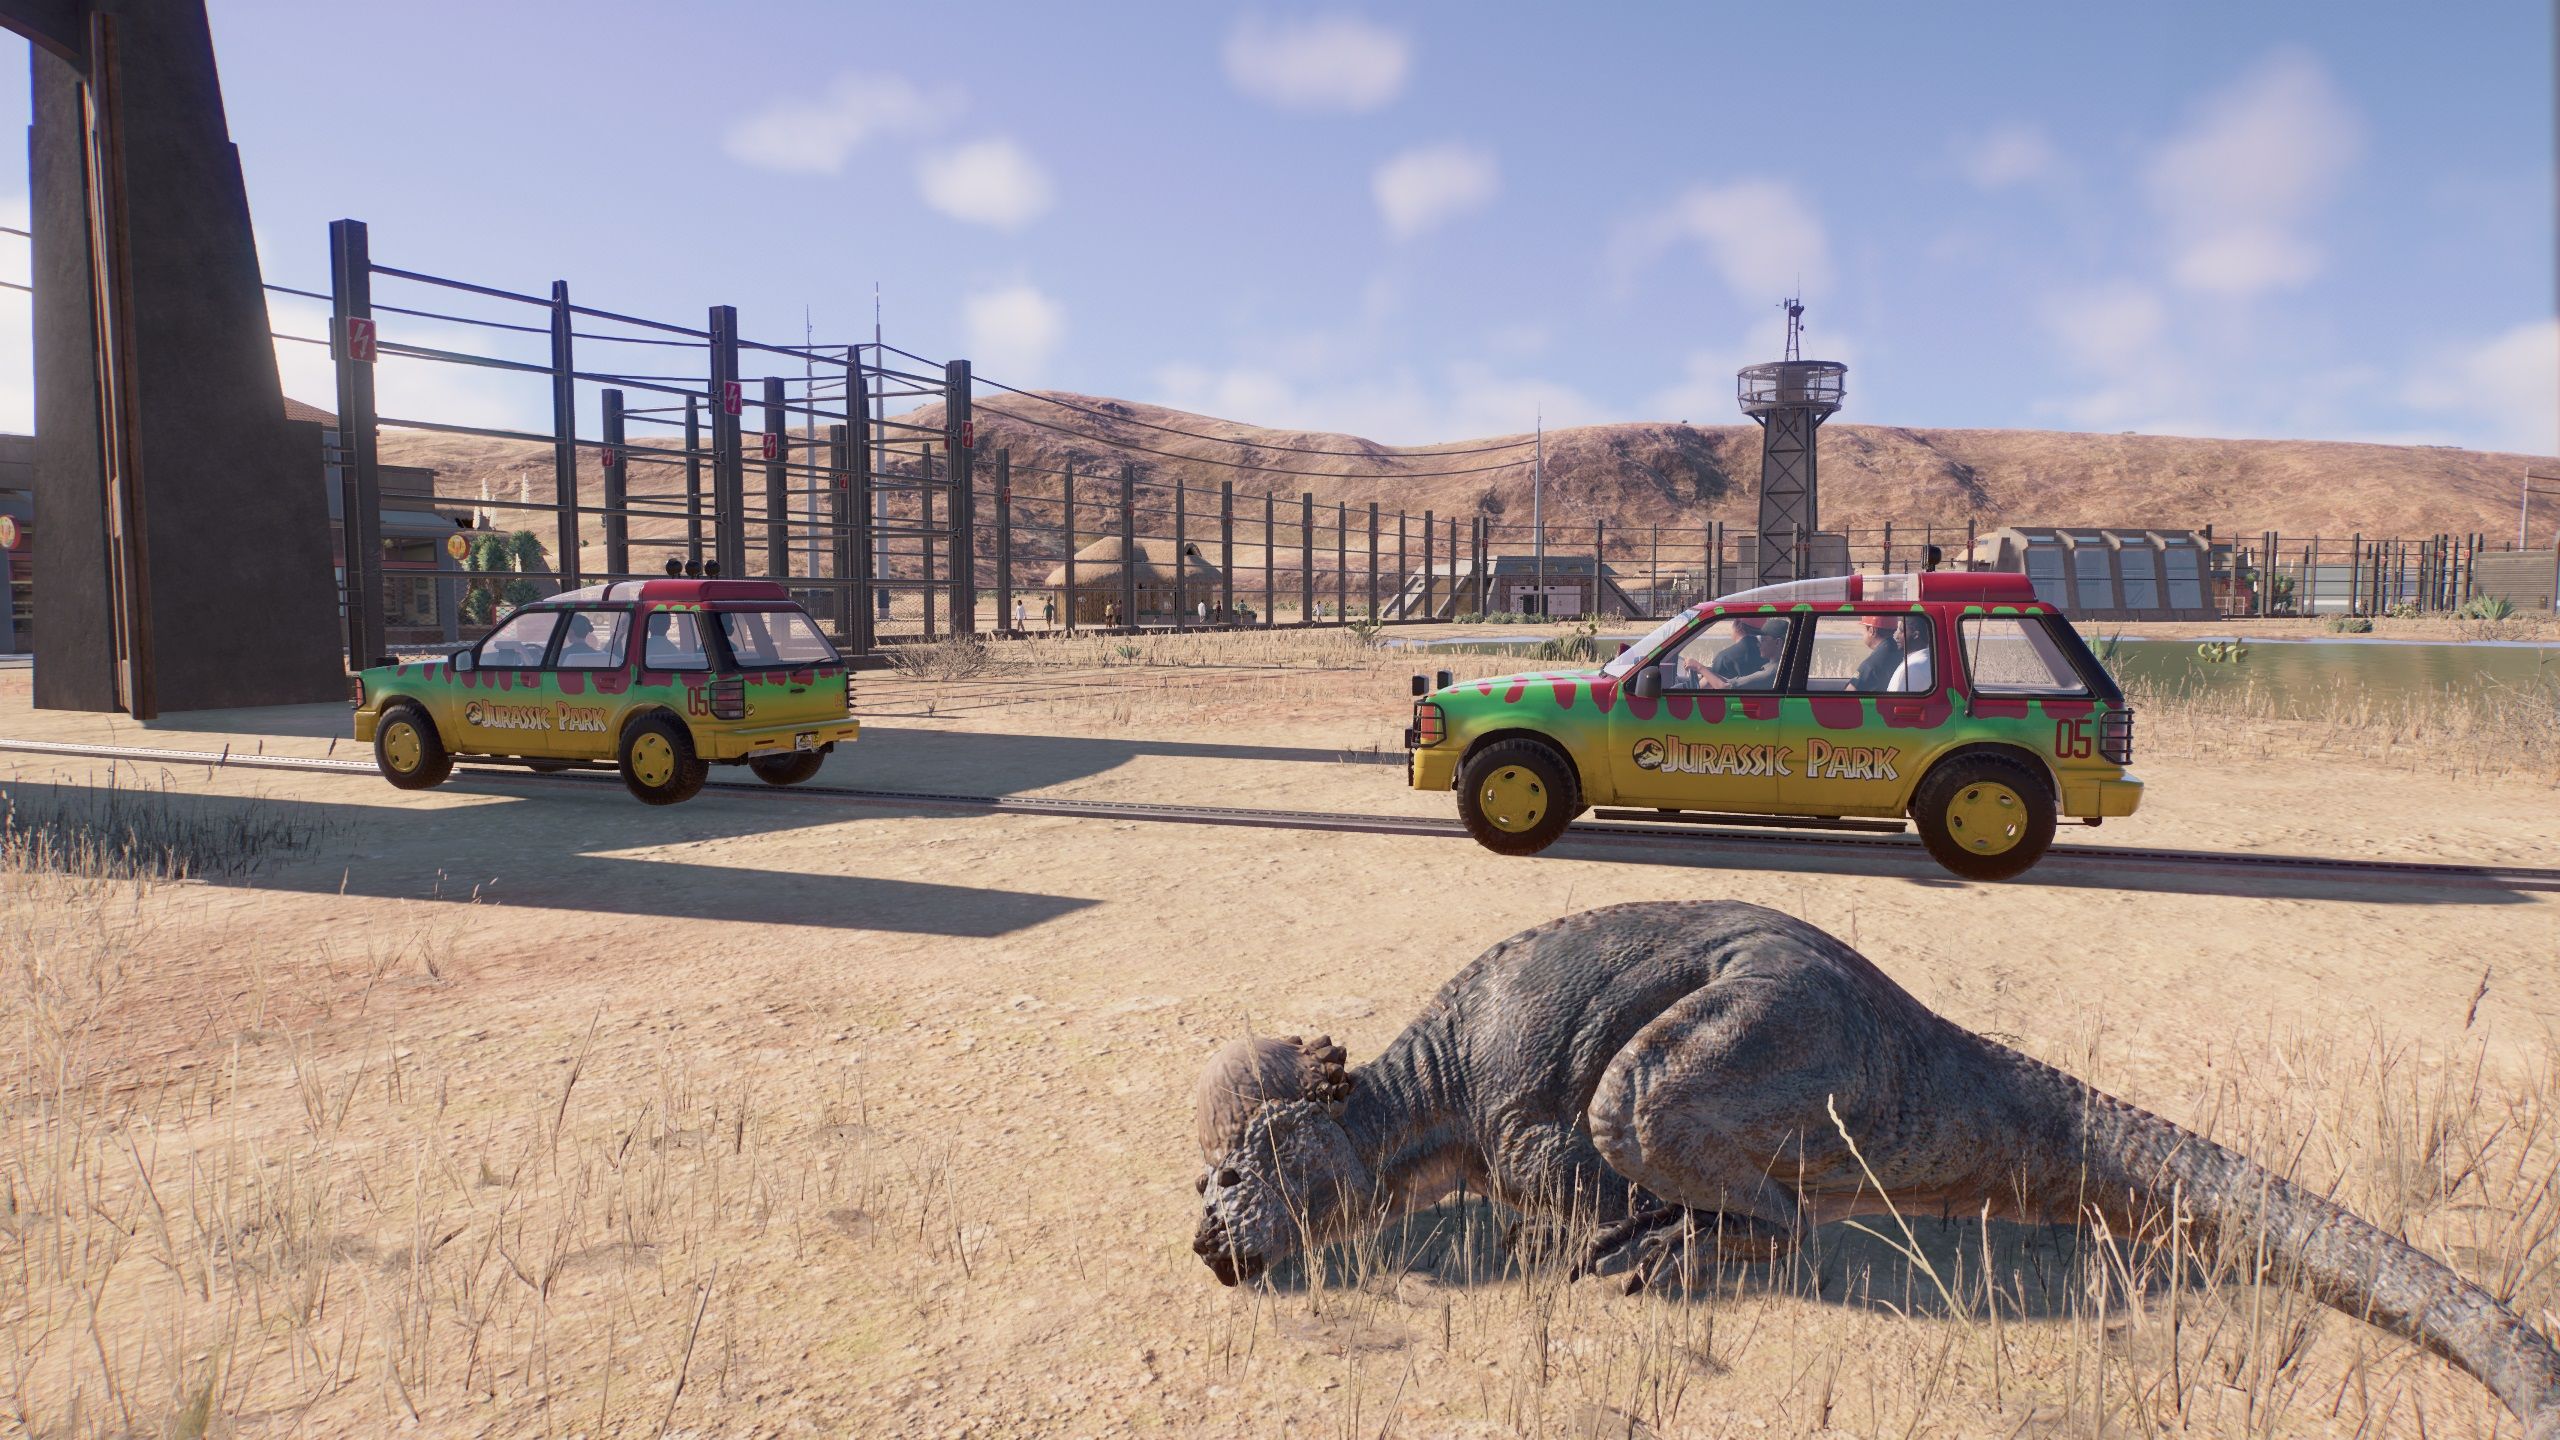 A Driving Tour Goes Past A Sleeping Dinosaur